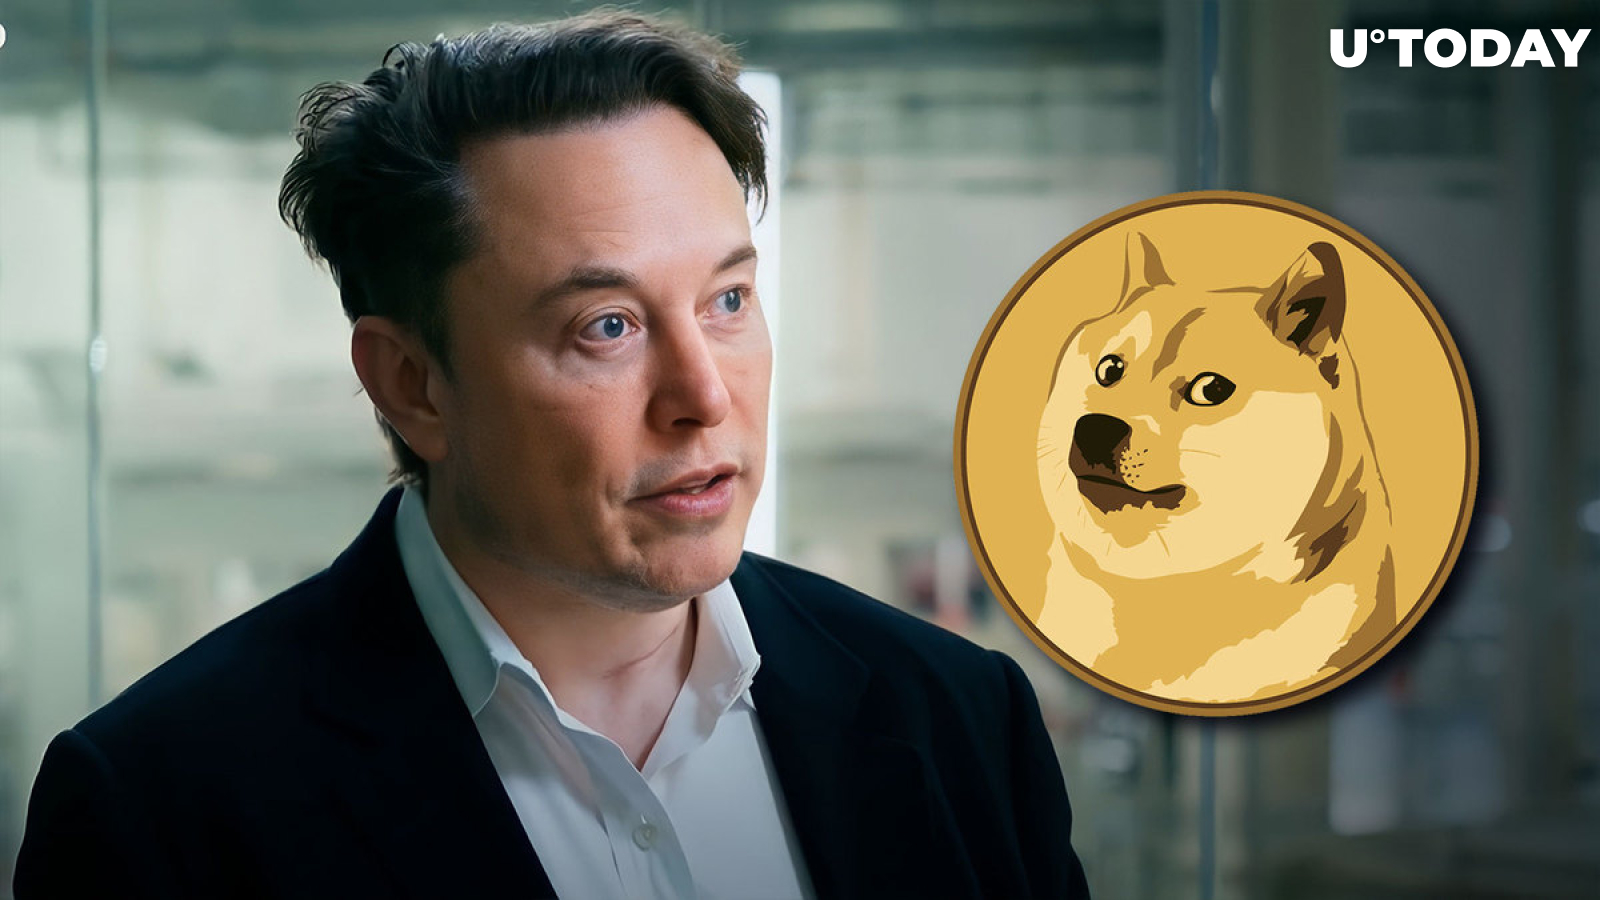 SHIB and DOGE Prices React to Elon Musk Paying Tribute to Kabosu